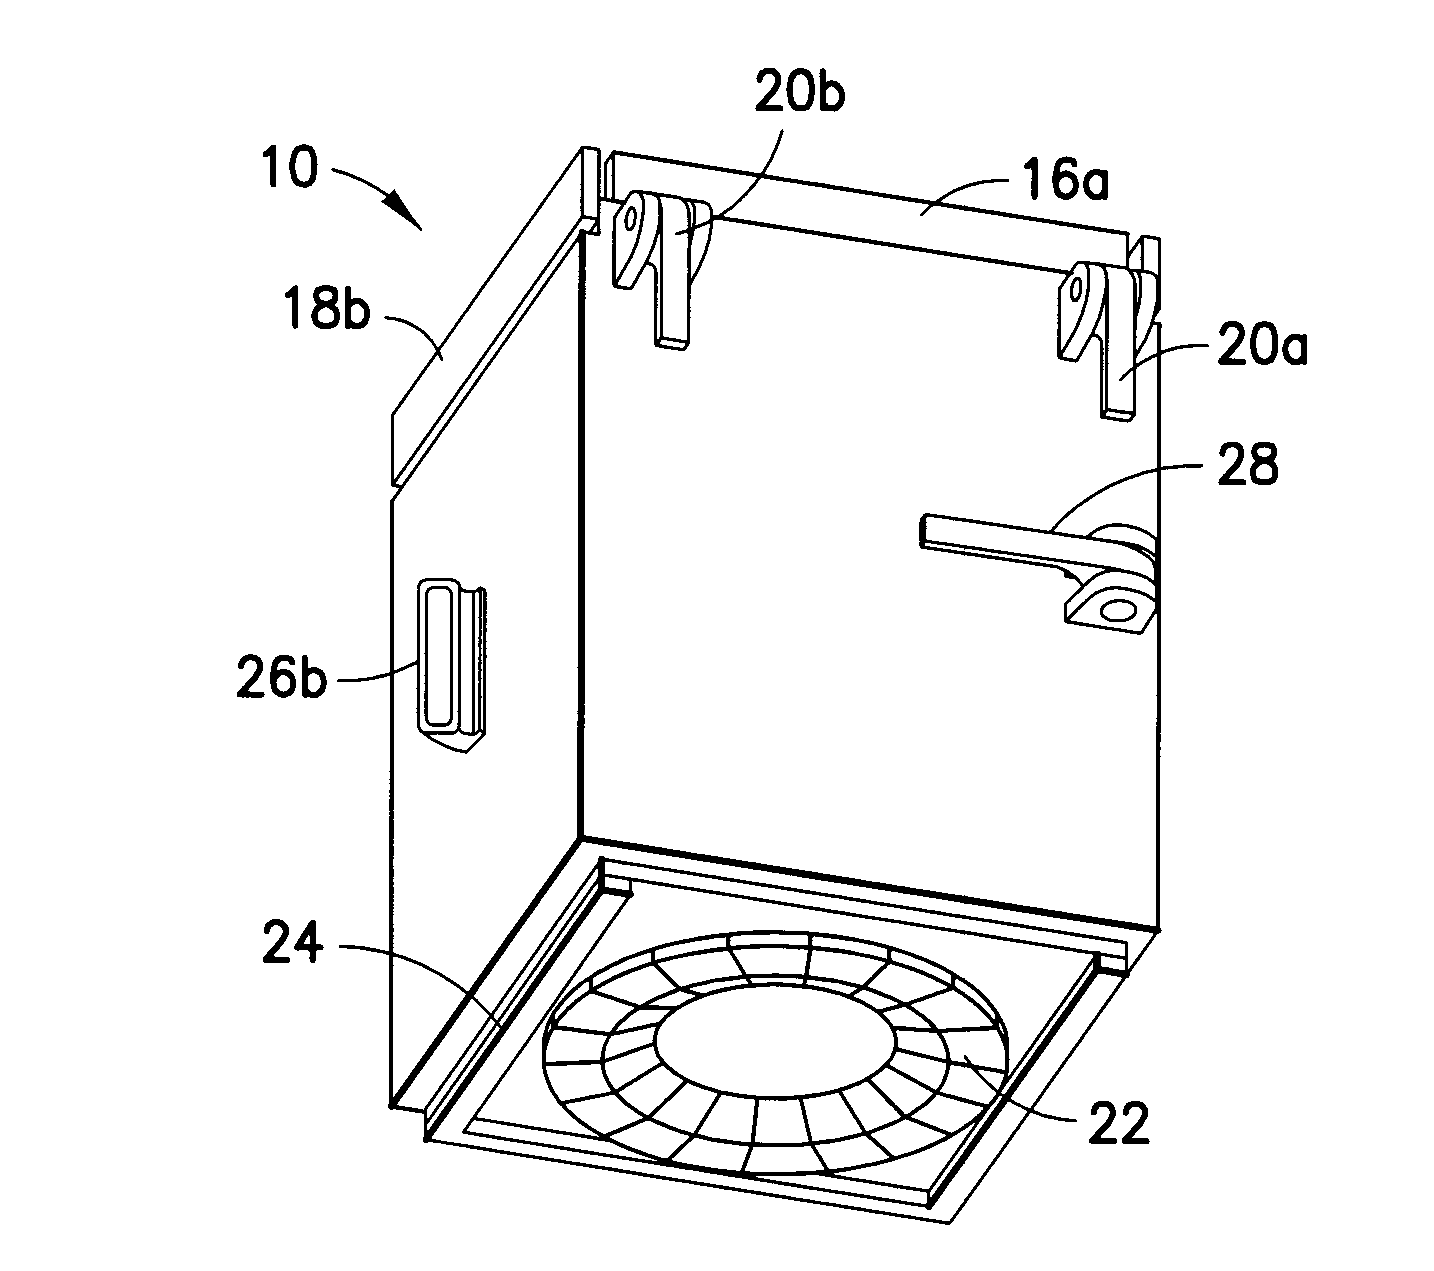 Modular system and methods for moving large heavy objects